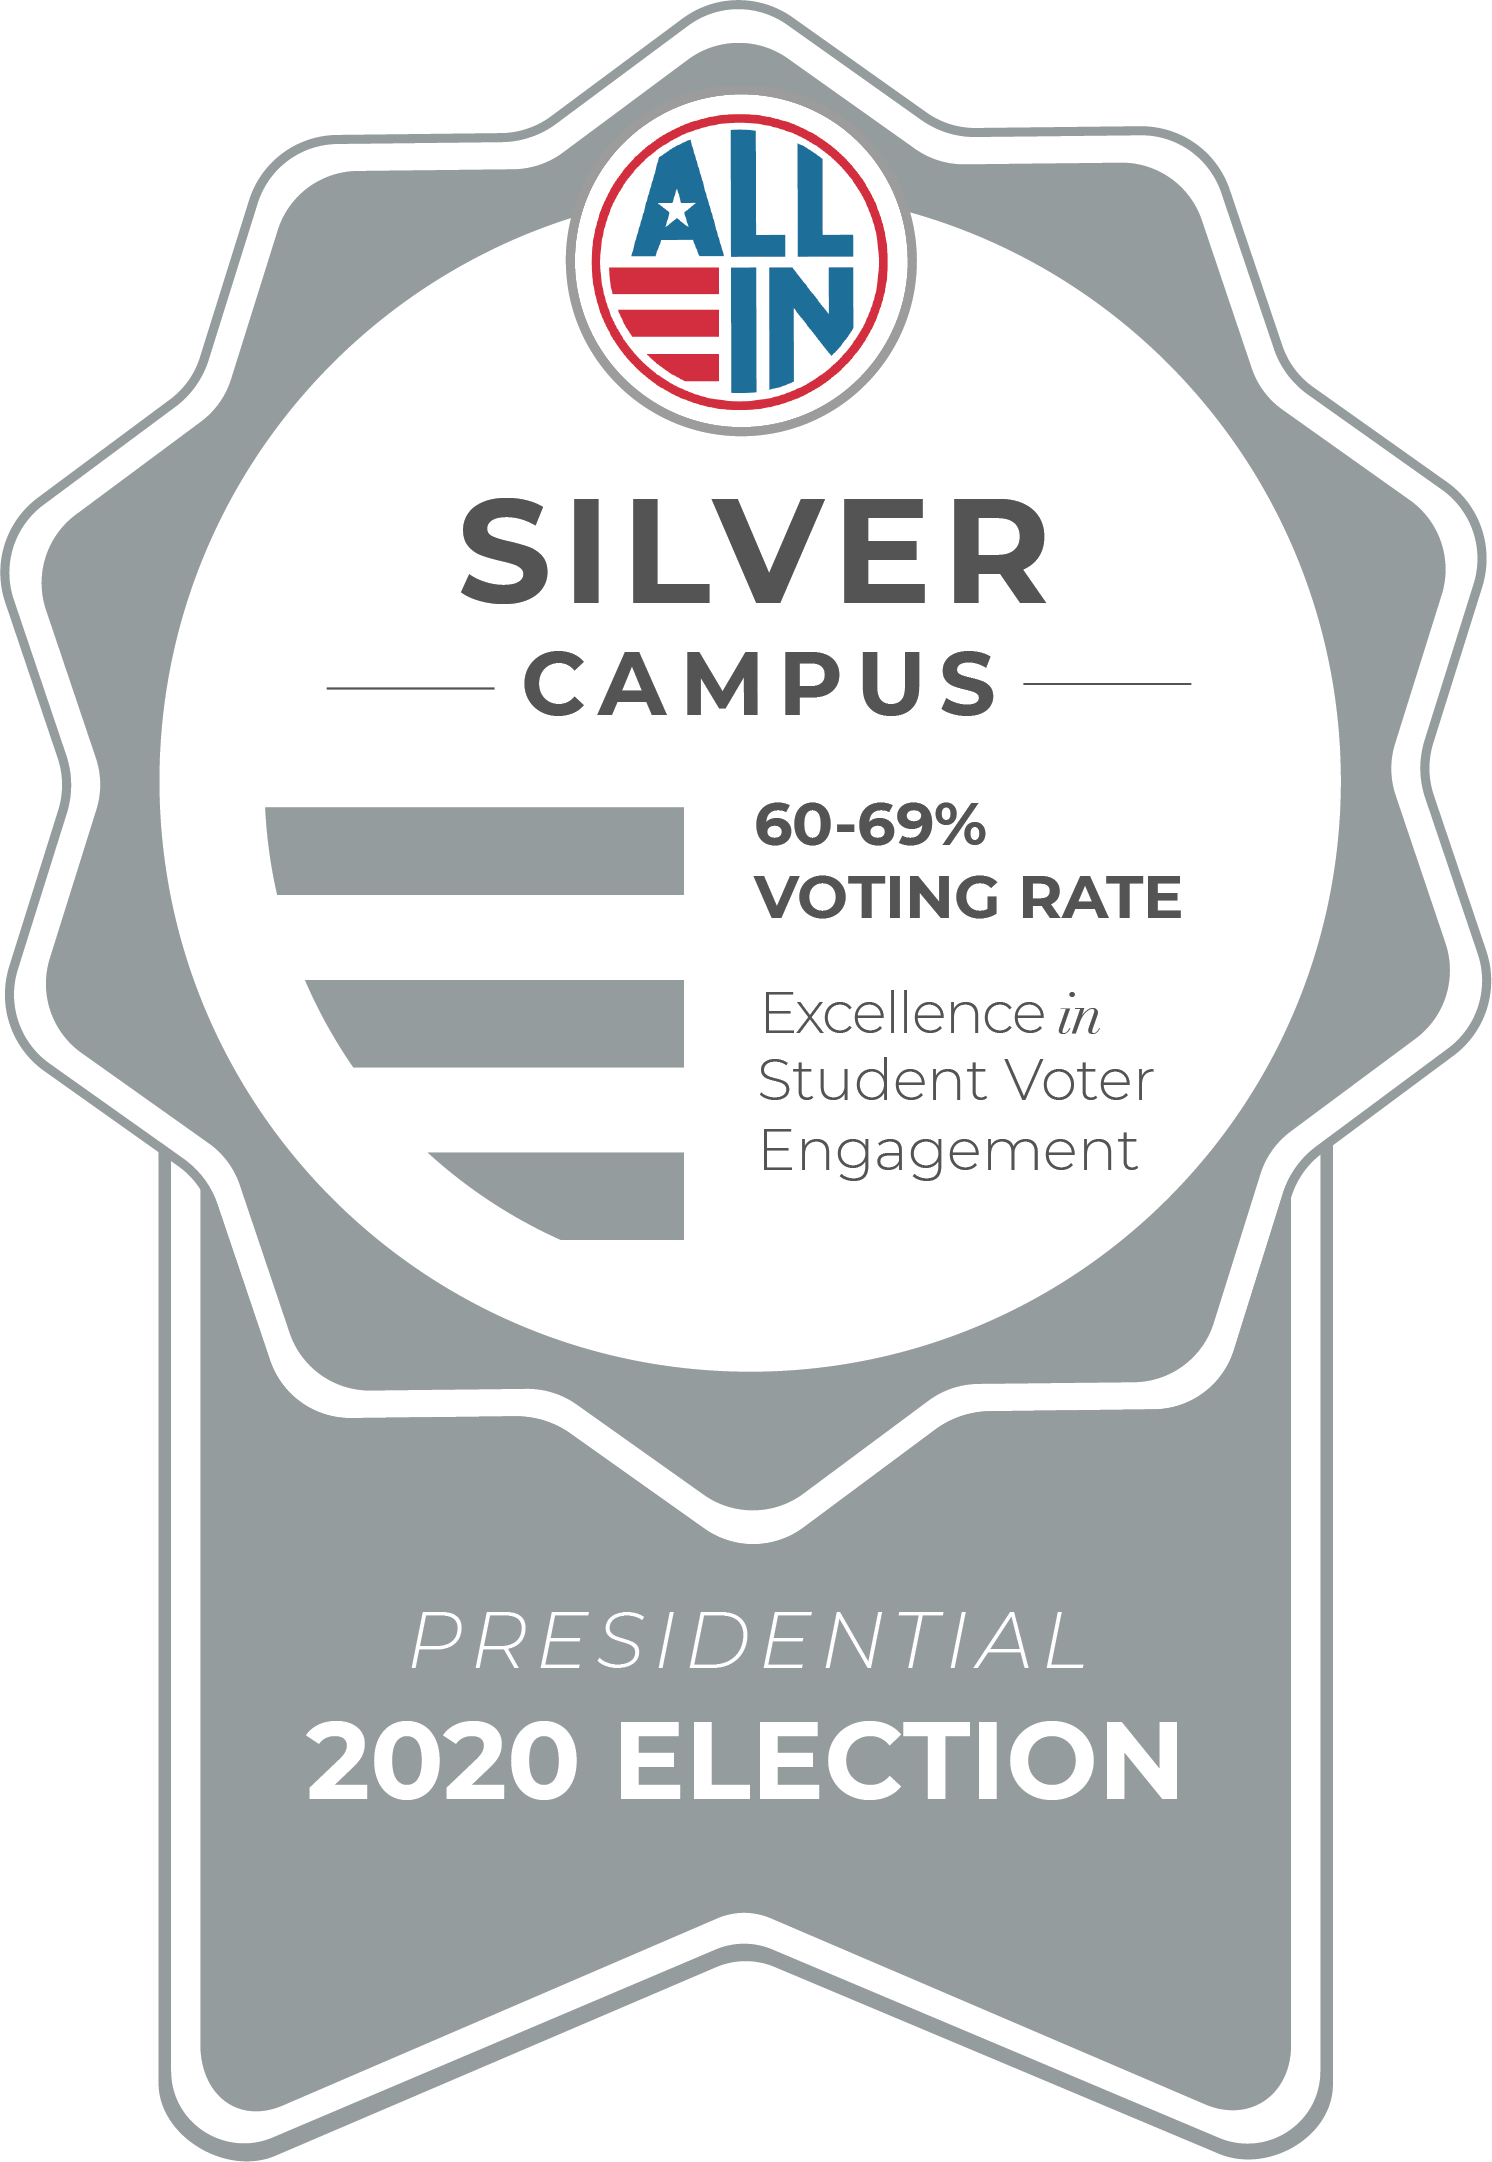 All In Silver Campus 60-69% voting rate. Excellence in Student Voter Engagement. Presidential 2020 Election.